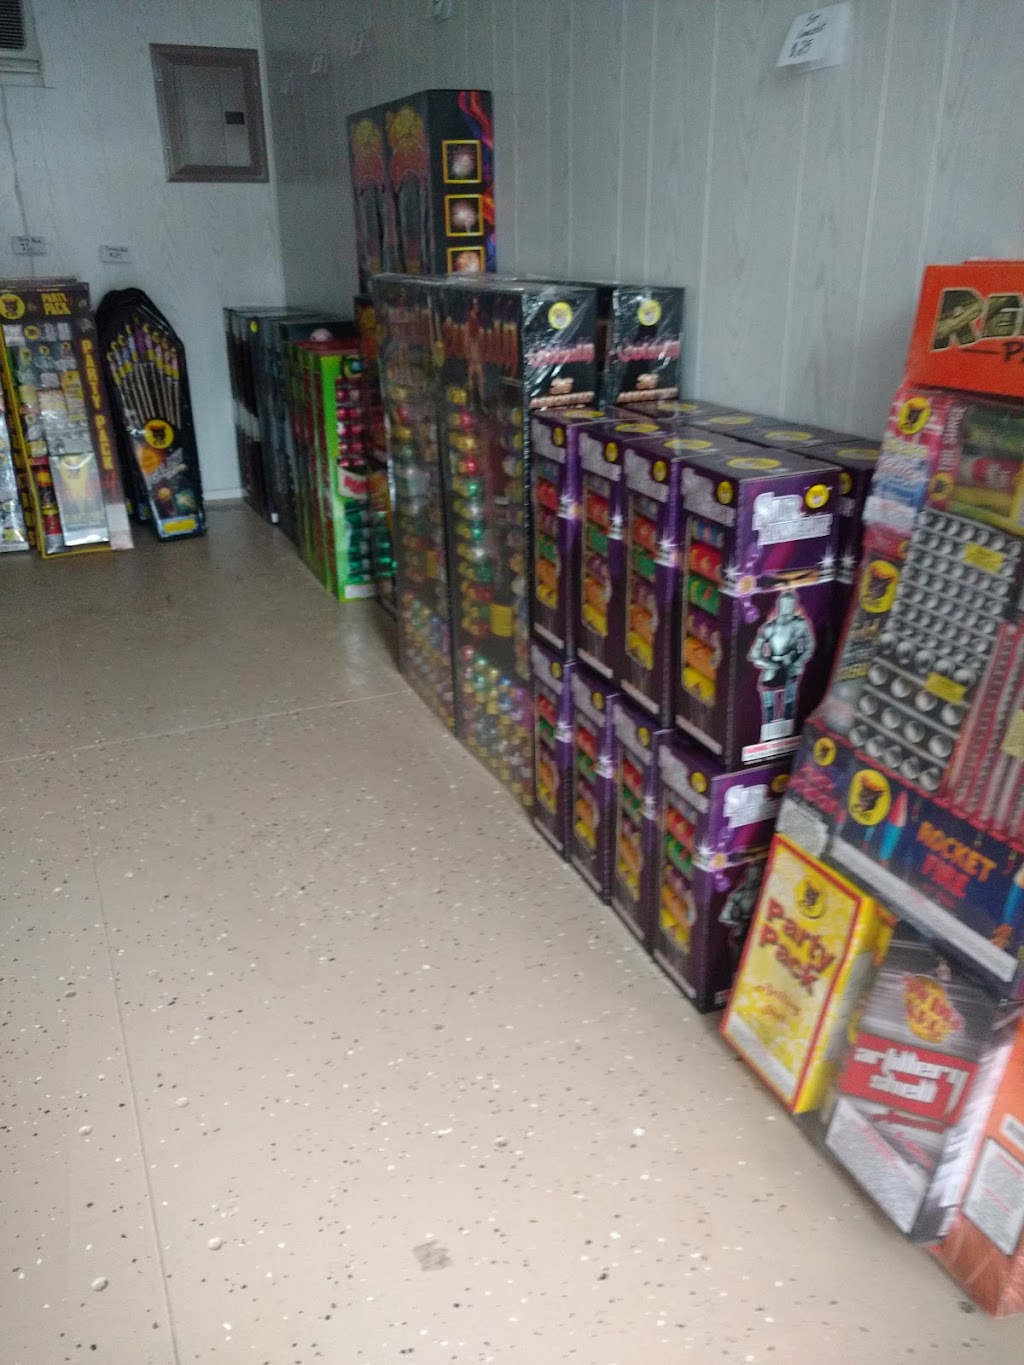 P Willy FIREWORKS #4 | 28000 County Rd 222, Bremen, AL 35033, USA | Phone: (256) 339-1525